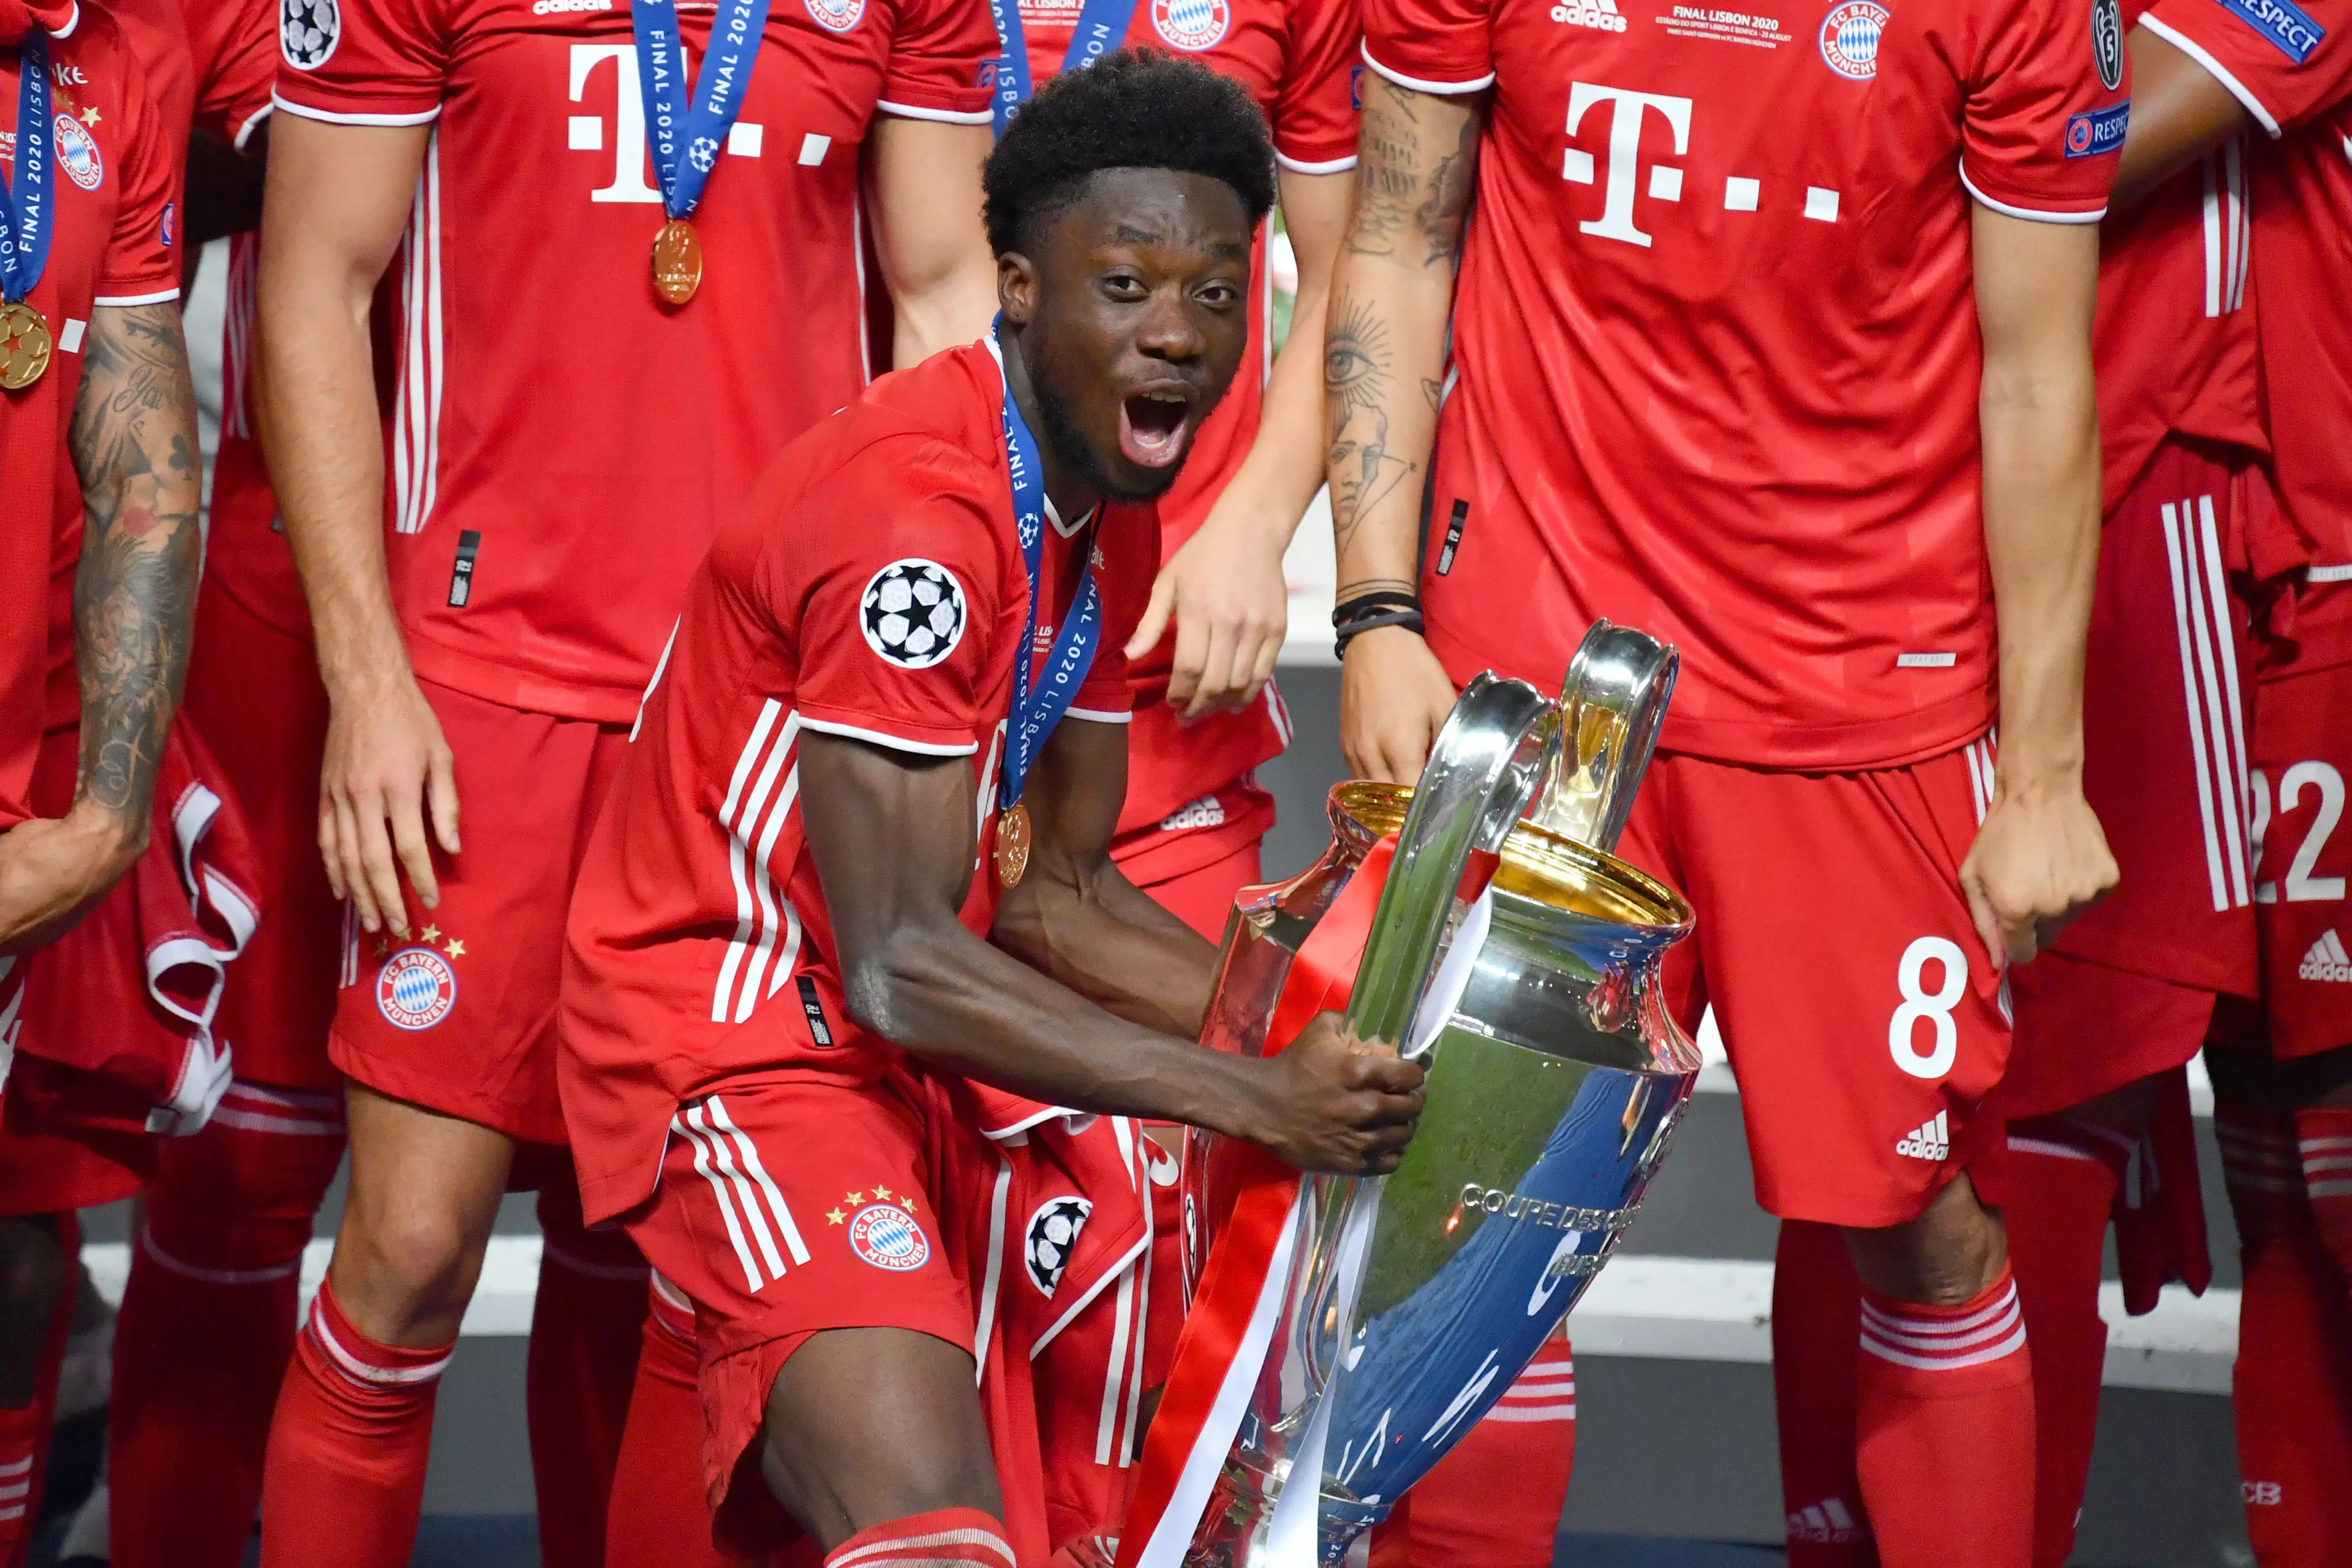 Davies was part of the Bayern team with Lewandowski. Image: PA Images